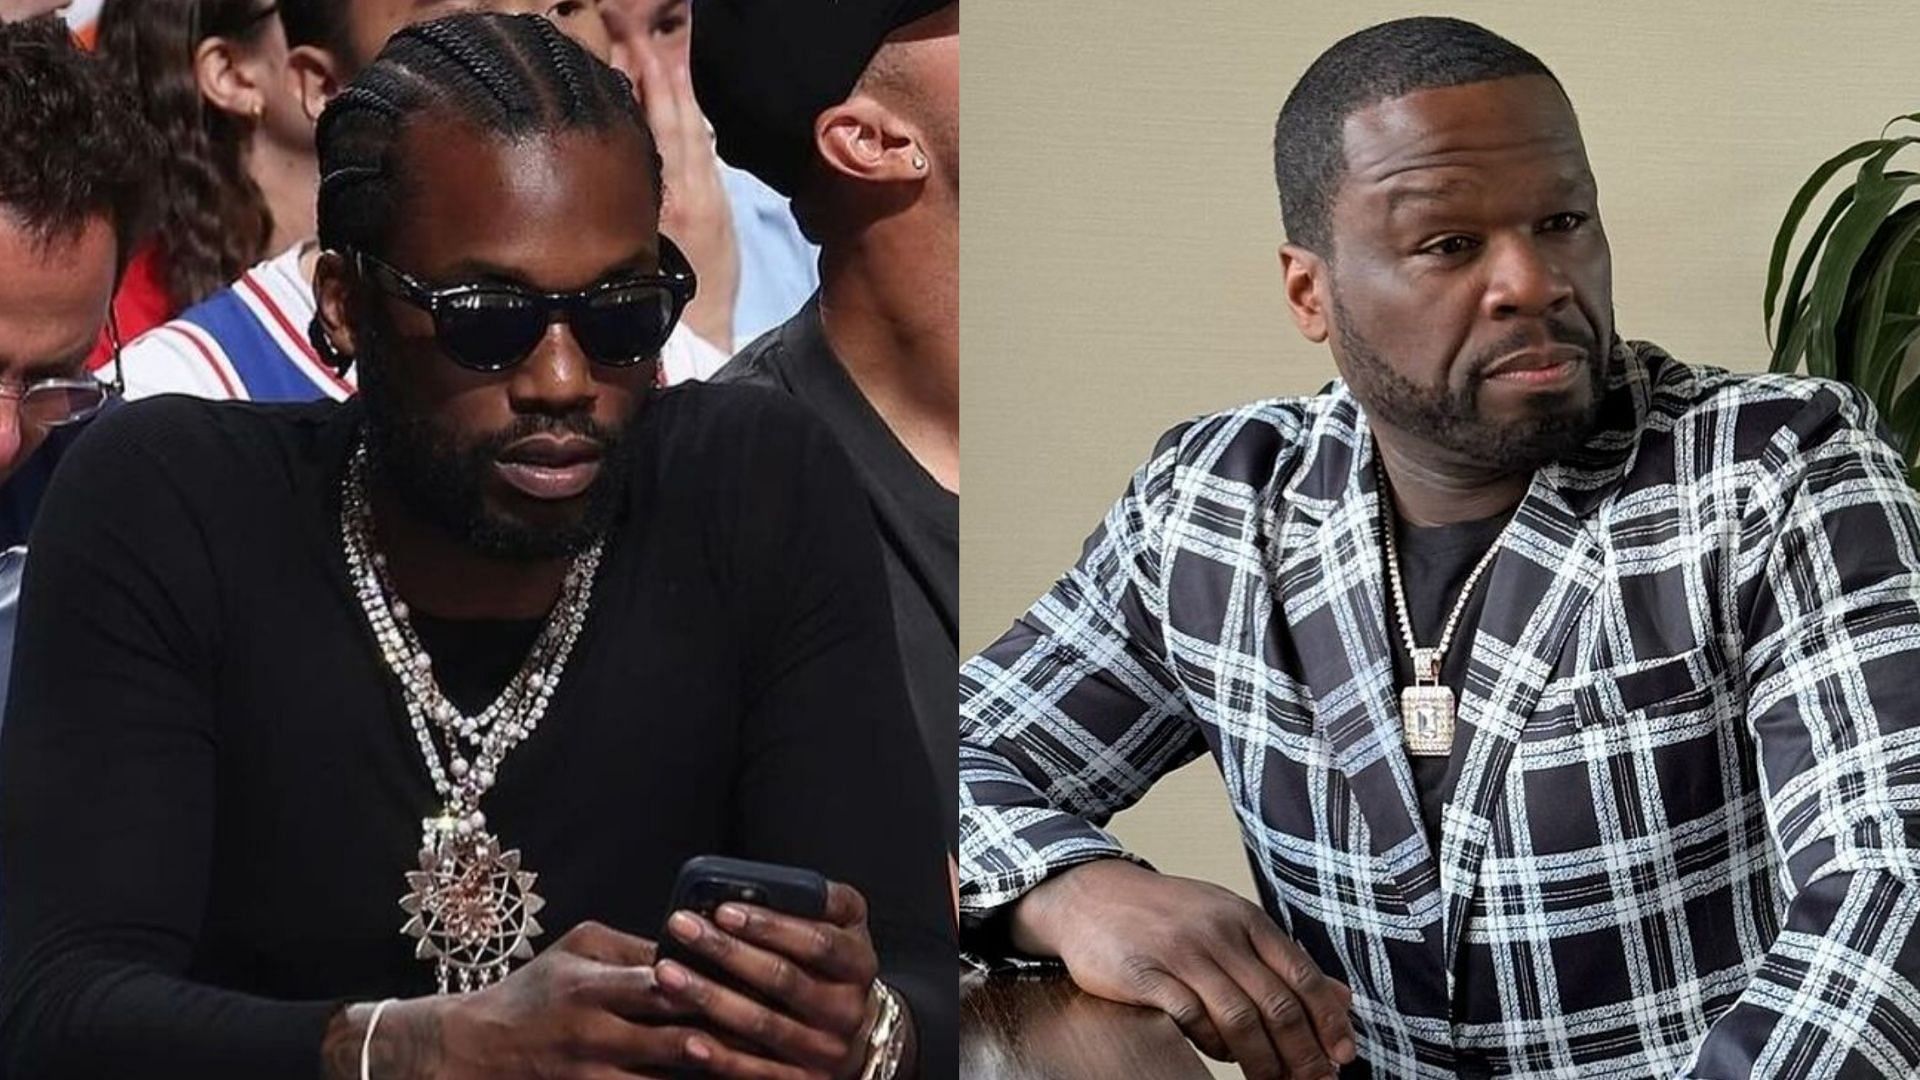 Meek Mill fires back at 50 cent over album sales, Diddy video, and more on X. (Image via Instagram/@meekmill, @50cent)